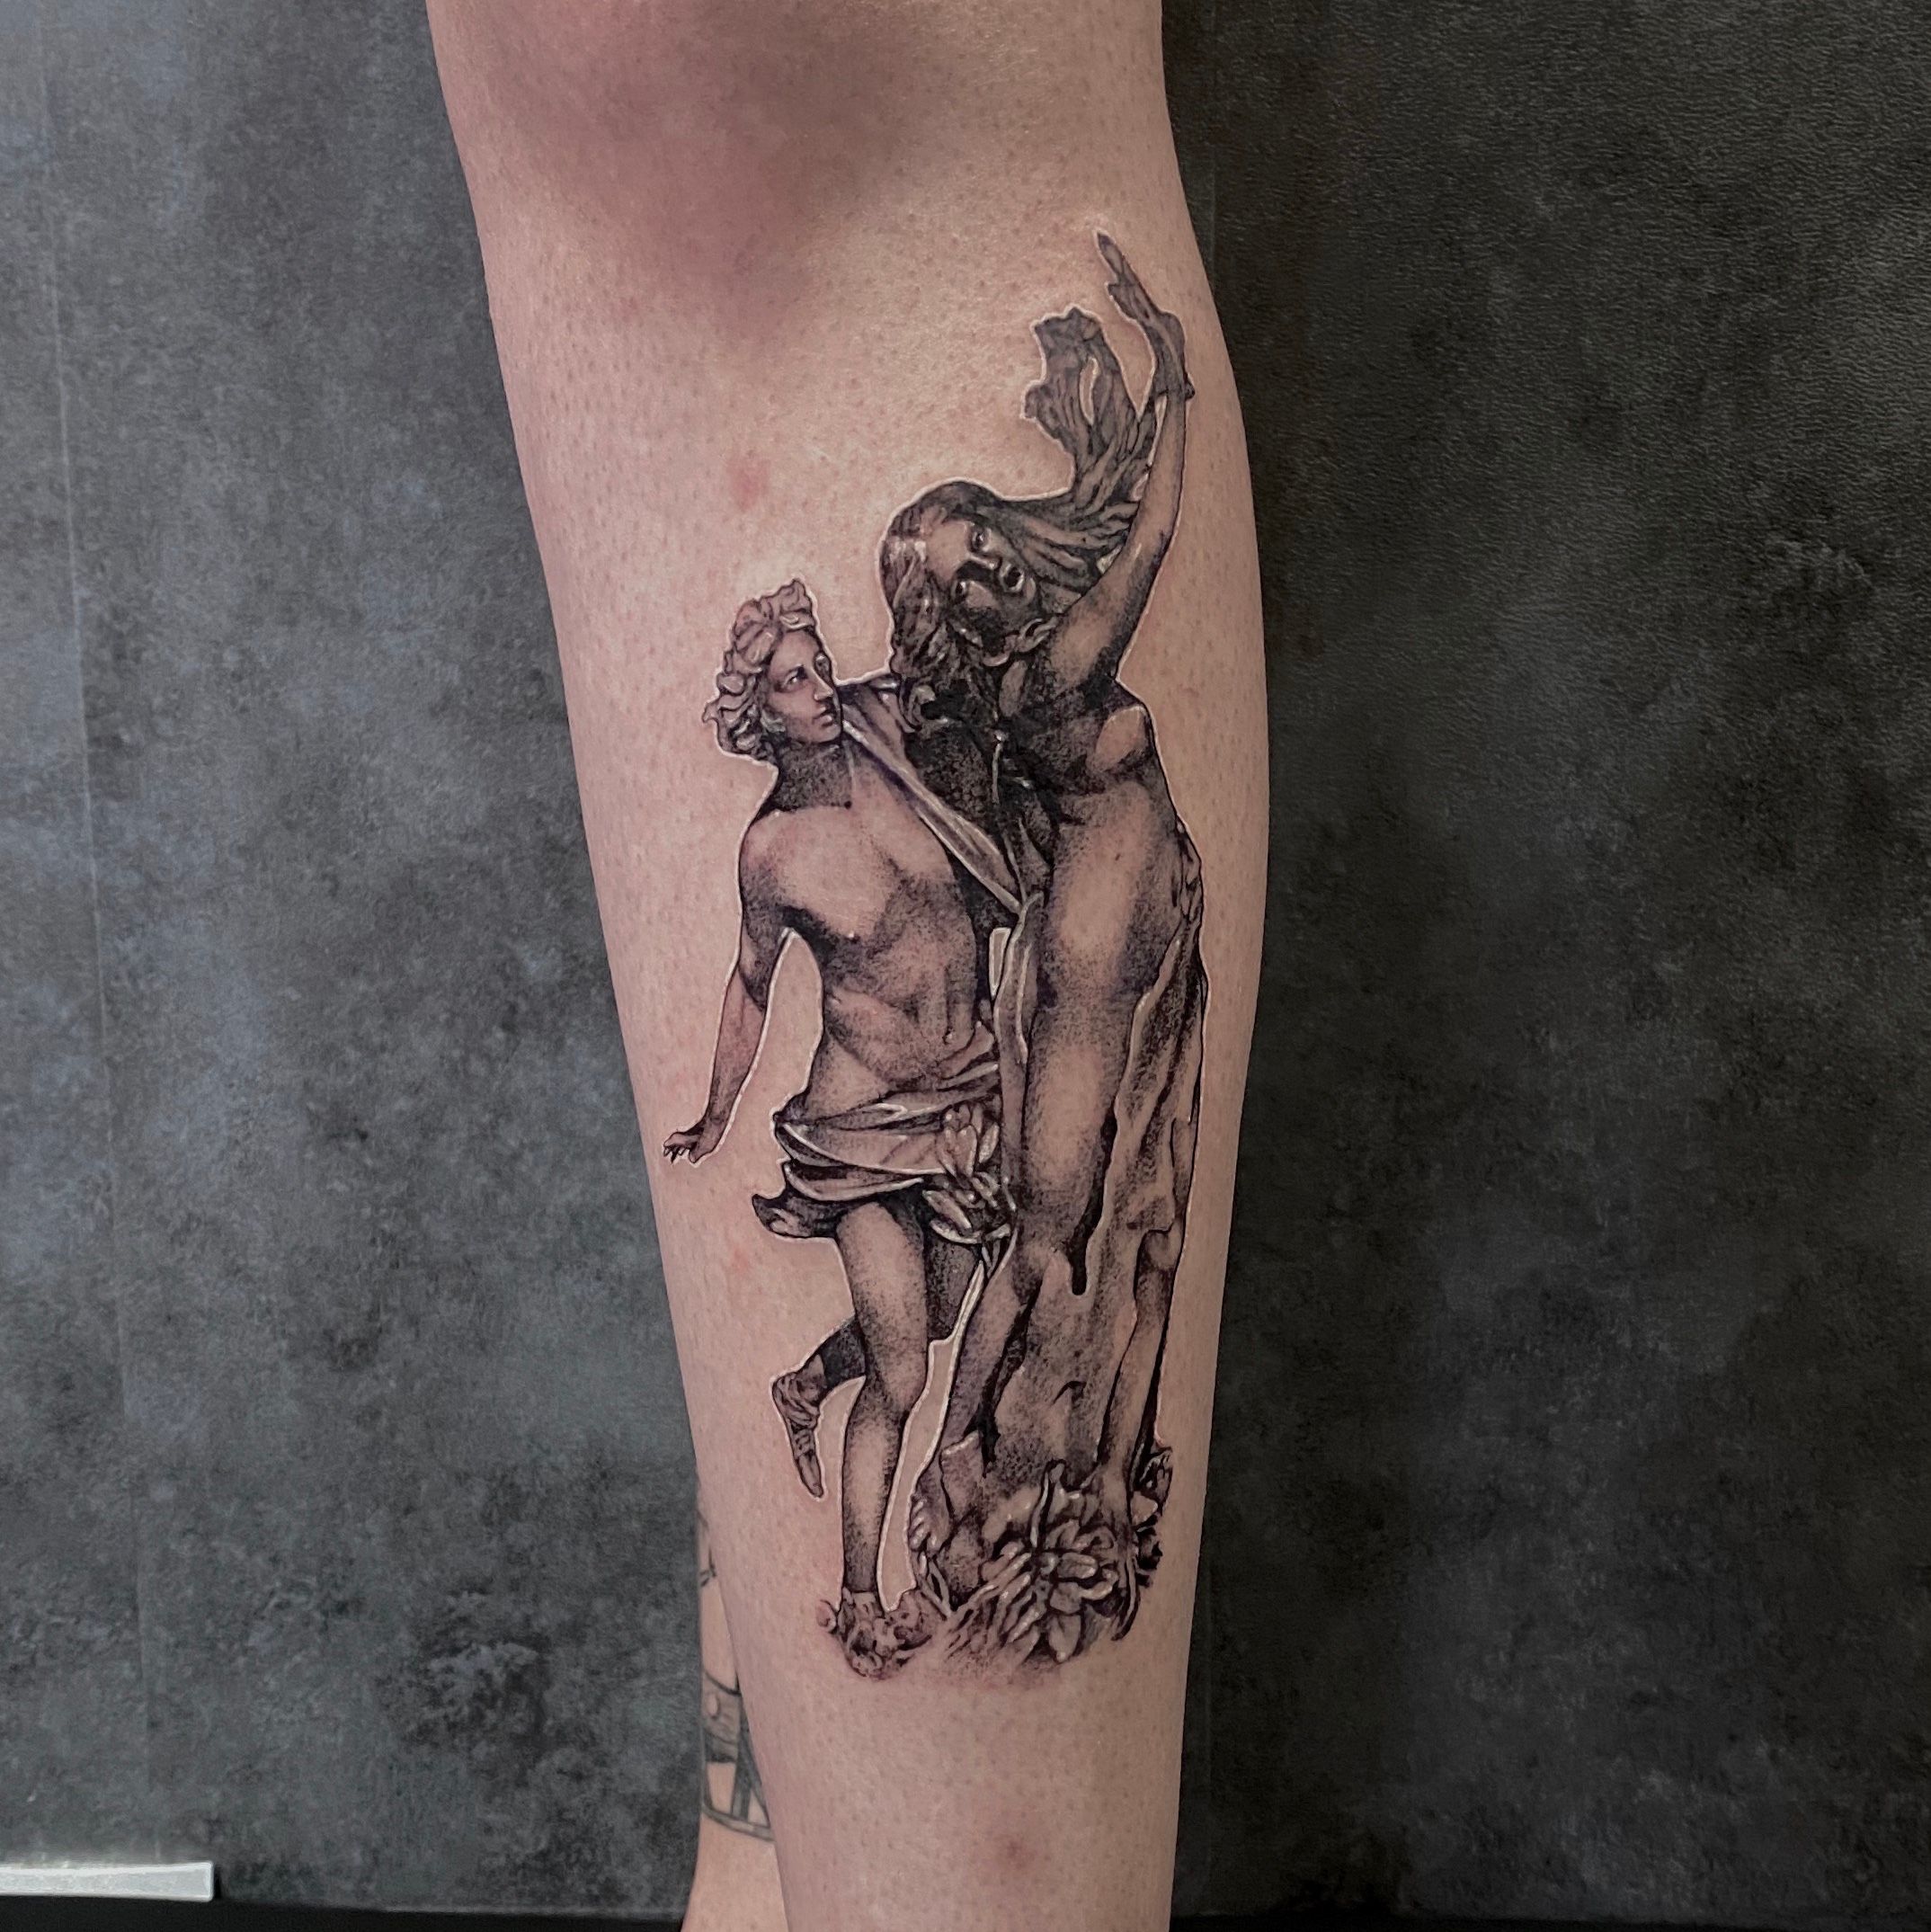 Revival Tattoos on Twitter Apollo Greek god tattoo done by Greg  httpstco3QnDfWze4X  Twitter